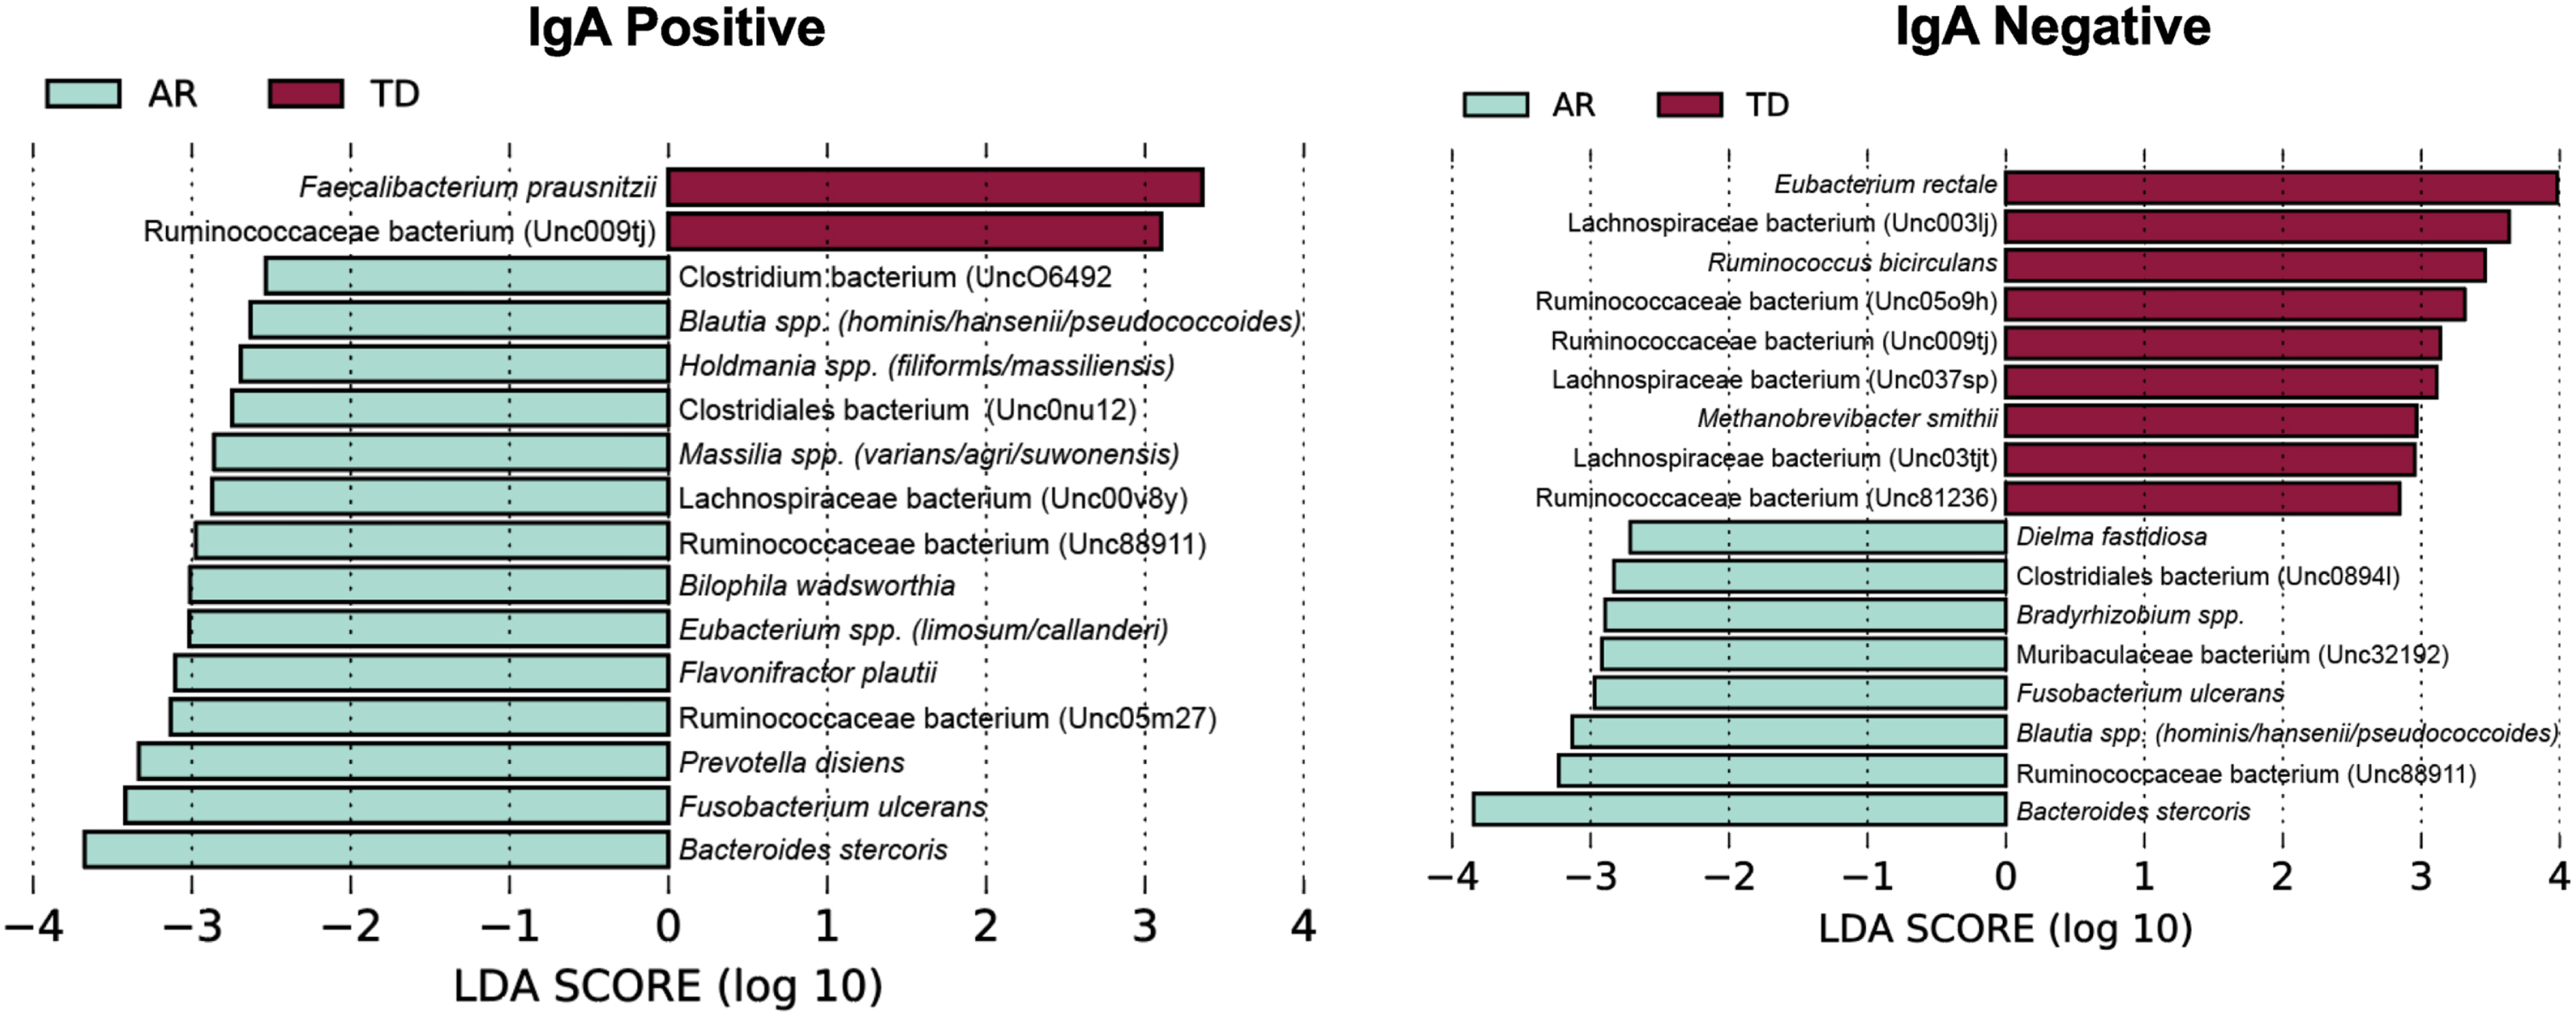 LEfSe identifies bacterial biomarkers associated with IgA-coated and uncoated genera across the Parkinson’s disease clinical subtypes. Analyses were conducted using parameters α<0.10 and linear discriminant analysis (LDA) threshold≥2.0.